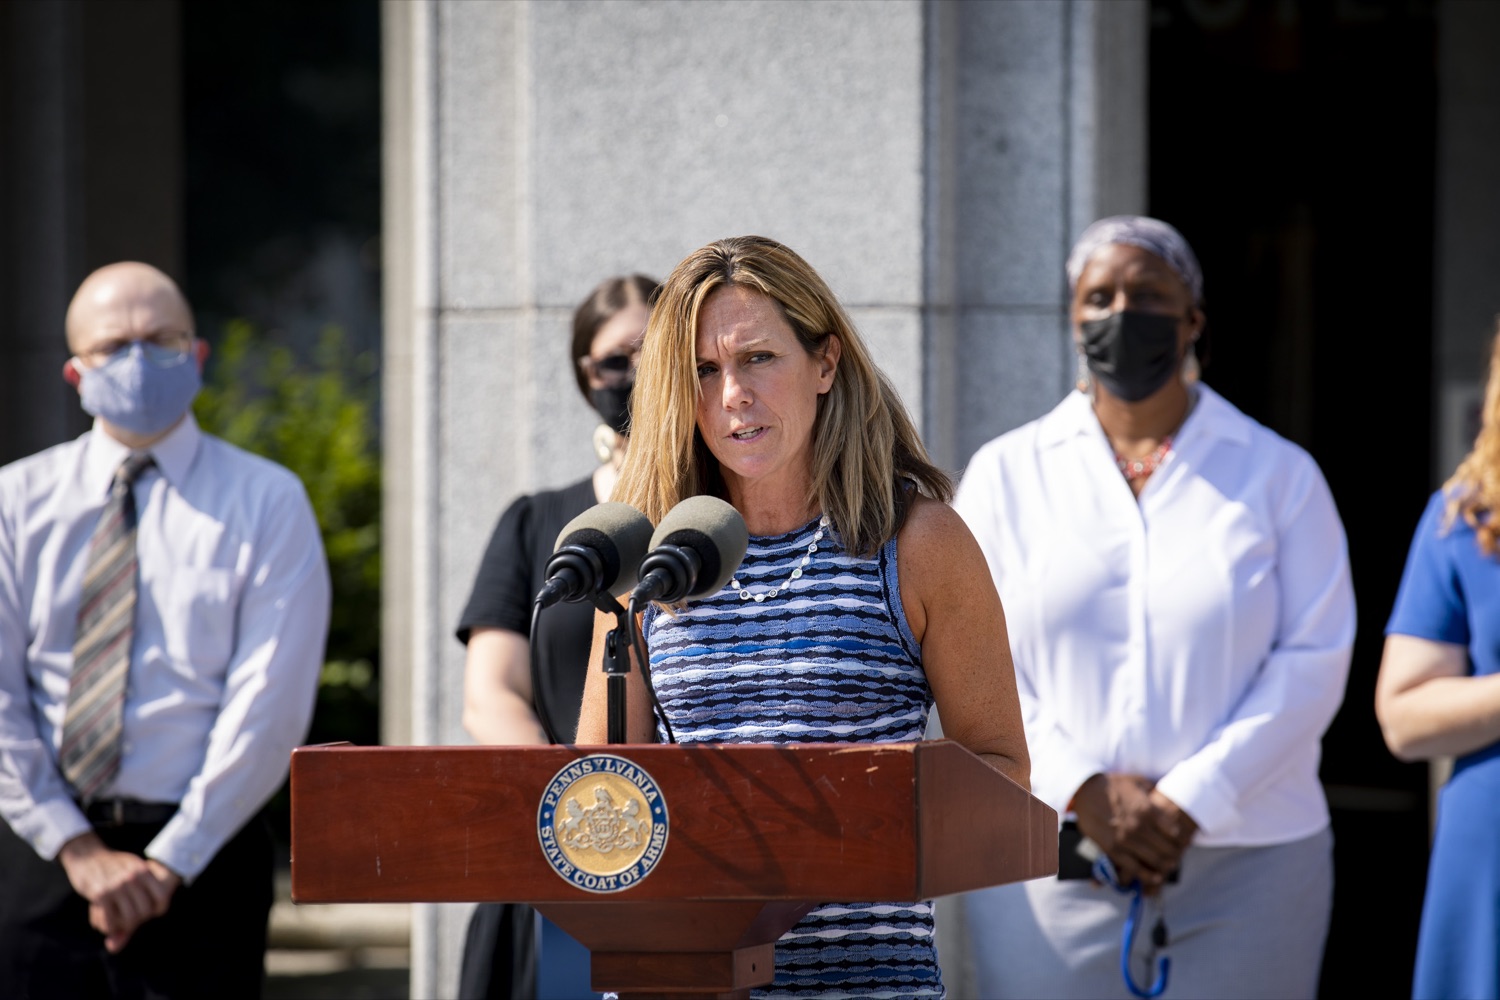 Vonda Ramp, State Director of Child Nutrition Programs with the Department of Education, addresses the need to fight childhood hunger, in Harrisburg, PA on September 15, 2021.<br><a href="https://filesource.amperwave.net/commonwealthofpa/photo/19104_dhs_hungerAction_cz_14.JPG" target="_blank">⇣ Download Photo</a>